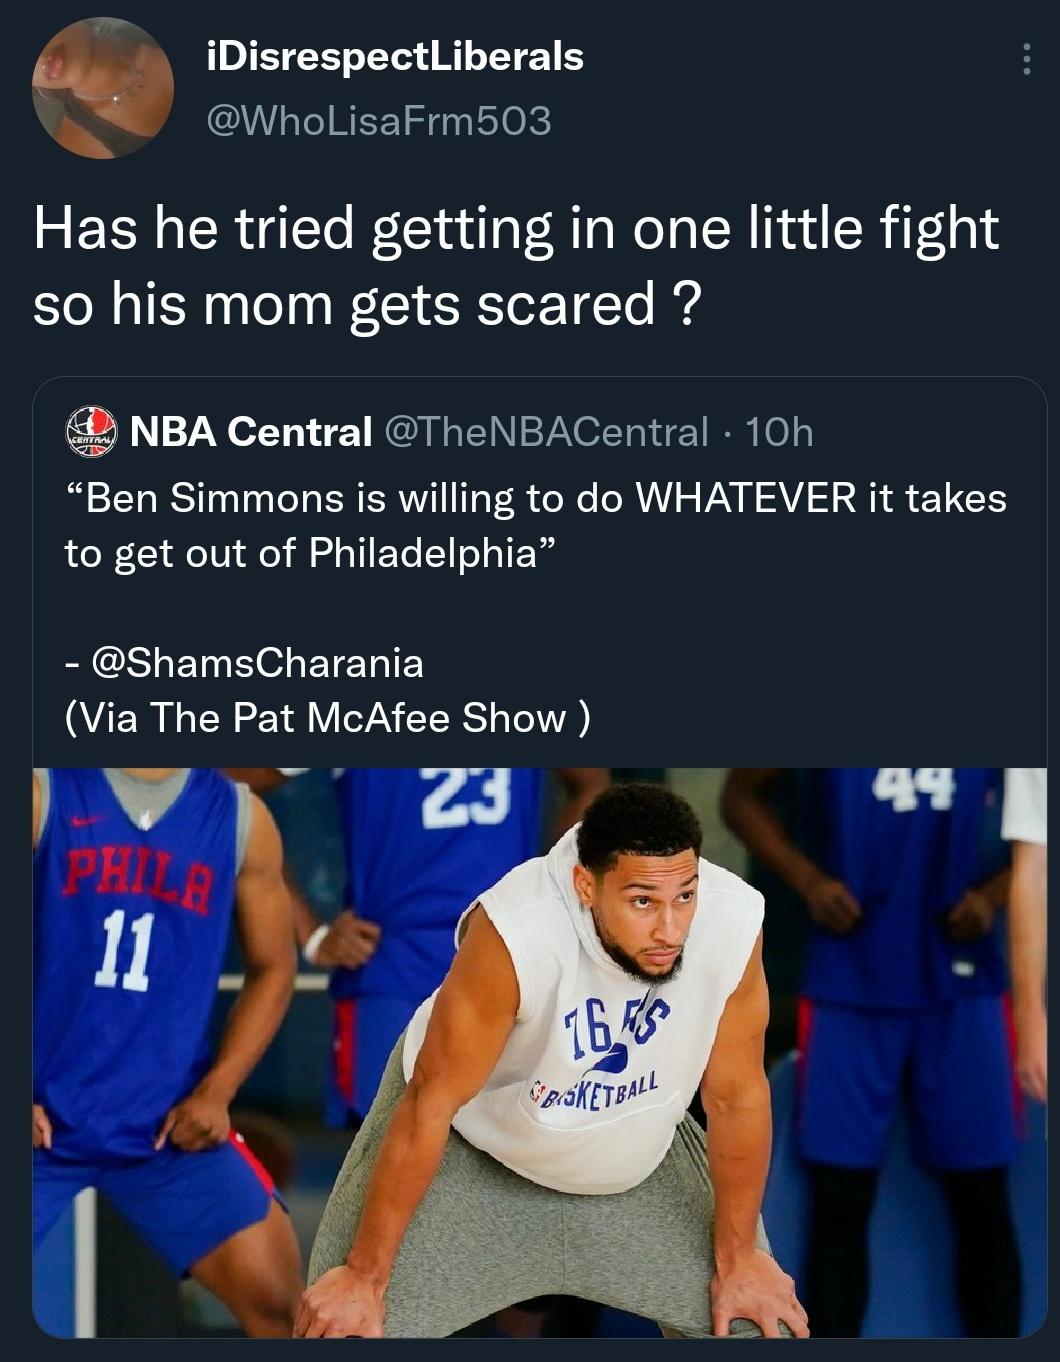 dank memes - ben simmons practice - O iDisrespectLiberals Has he tried getting in one little fight so his mom gets scared ? Centrala Nba Central 10h Ben Simmons is willing to do Whatever it takes to get out of Philadelphia Via The Pat McAfee Show 23 49 Ph